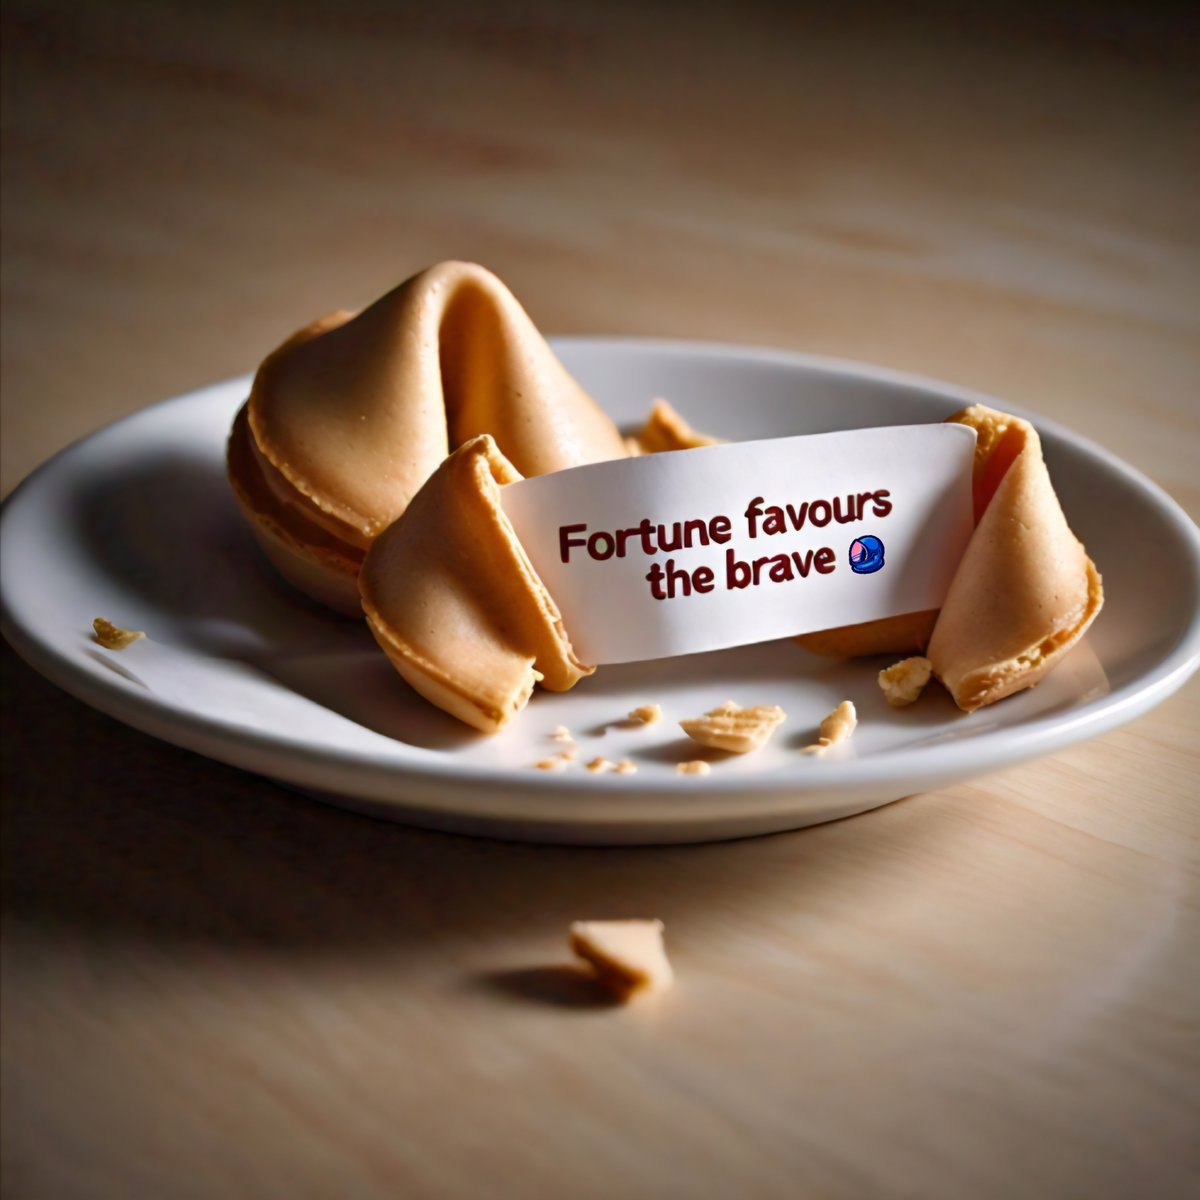 I just checked my fortune today and it told me to be brave 😄

$FFTB #FFTB  #crofam